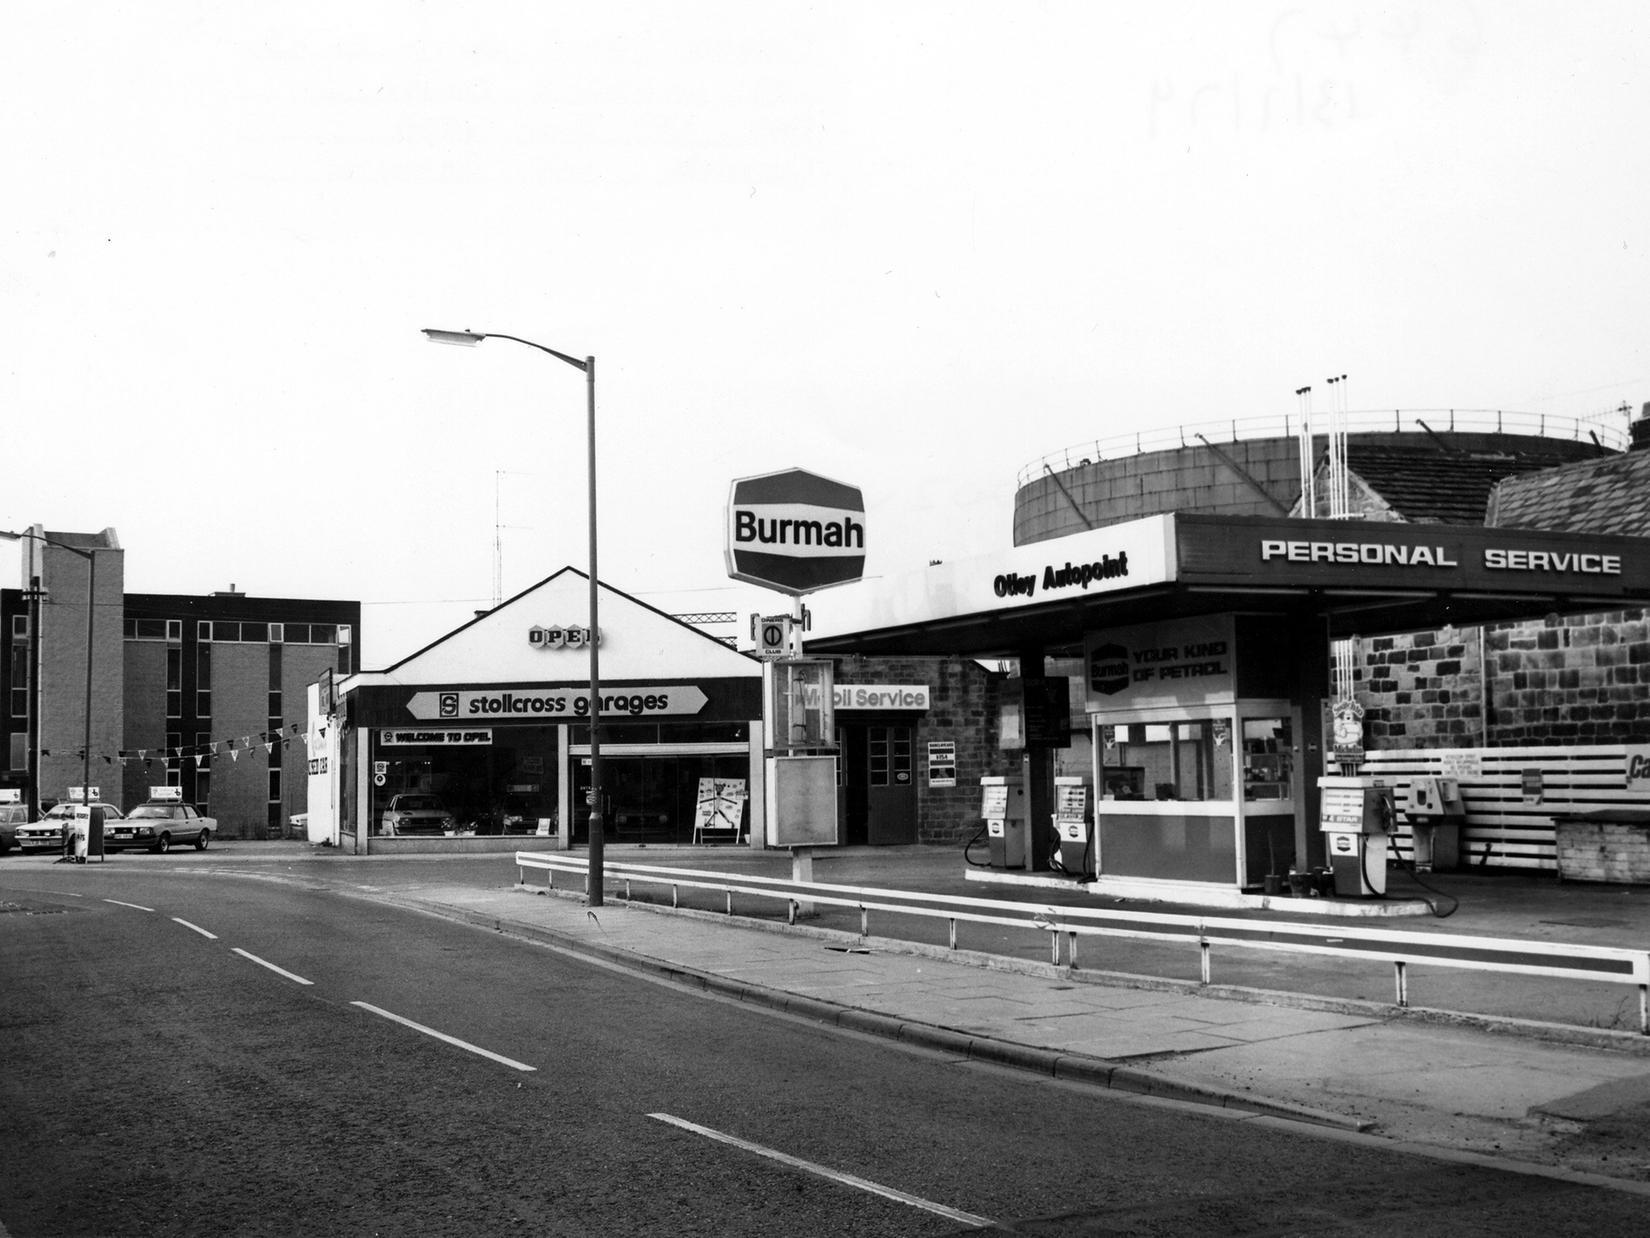 Gay Lane showing Otley Autopoint petrol station. Beside this is the junction with Wellcroft, with Stollcross Garages car showroom beyond.